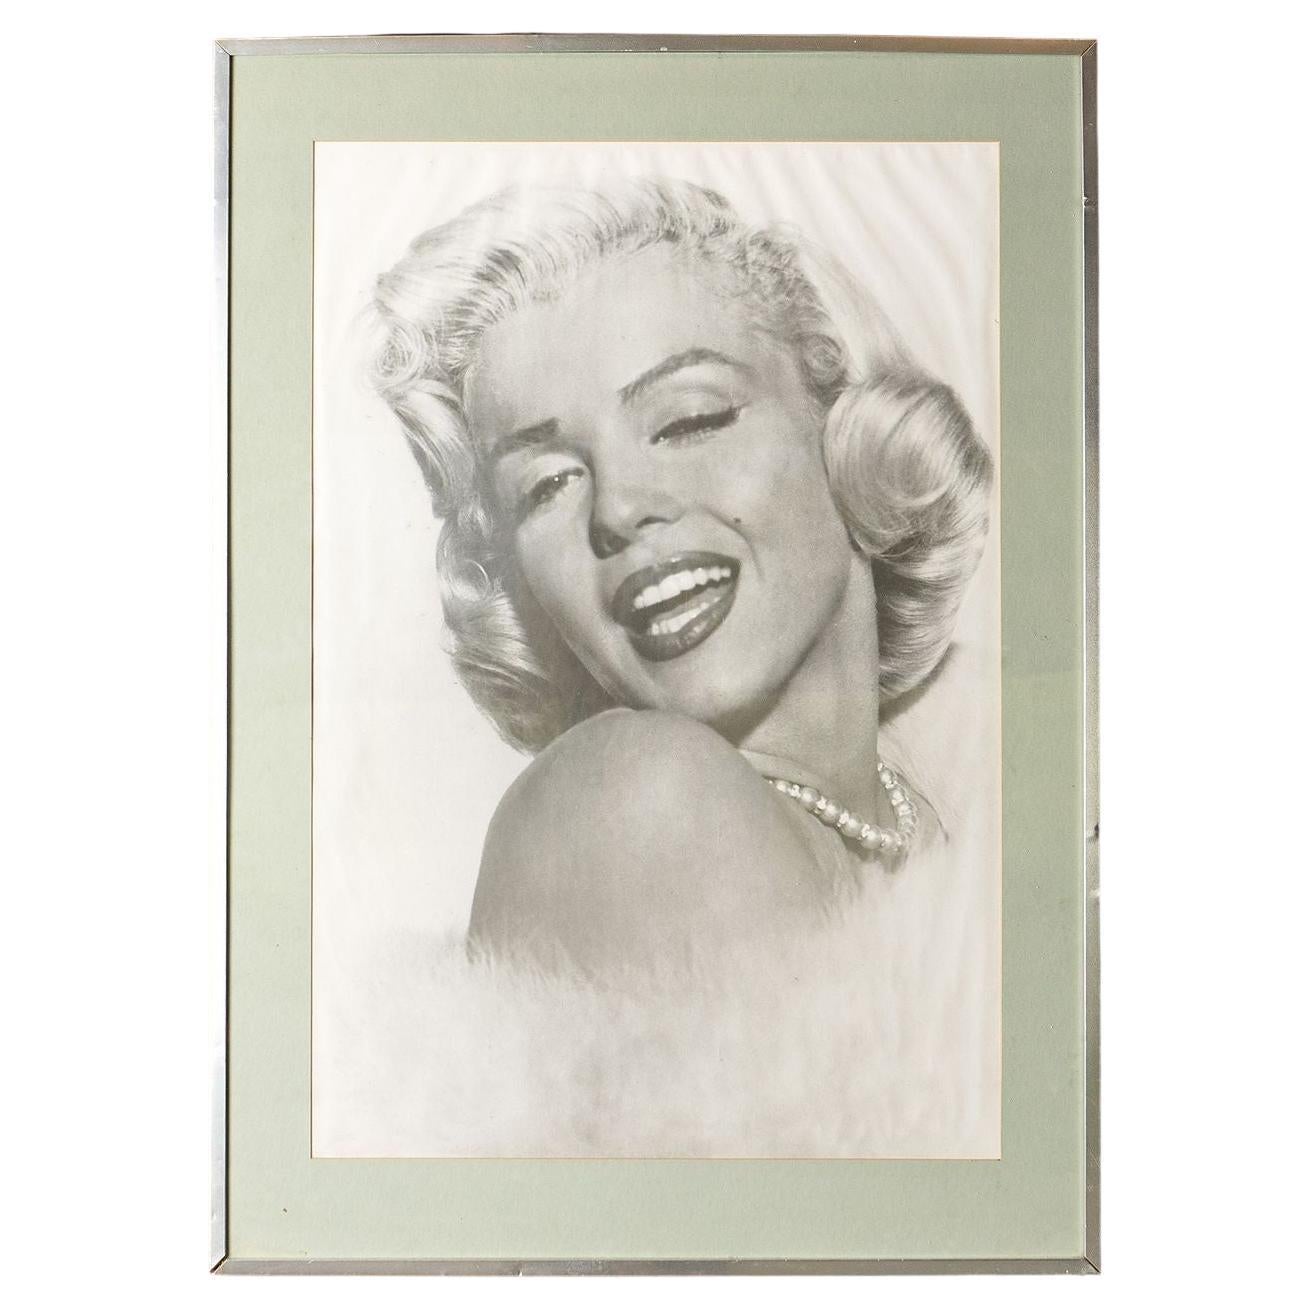 Large Vintage Marilyn Monroe Photographic Portrait Print by Frank Powolny, 1970s For Sale